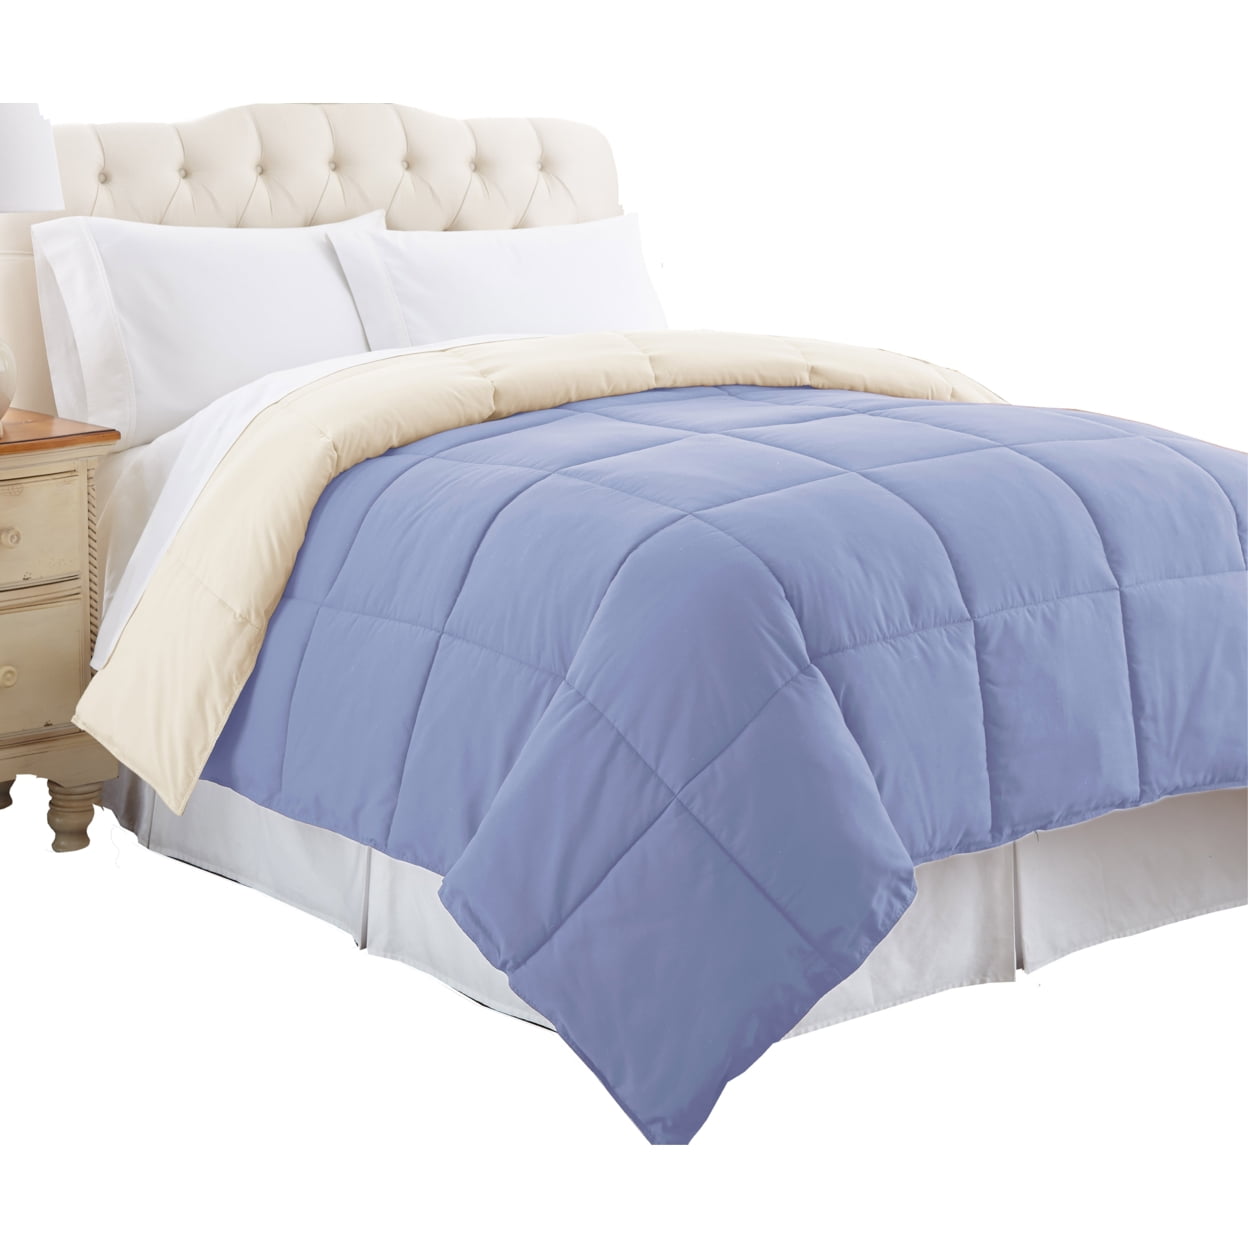 Bm202039 Genoa Twin Size Box Quilted Reversible Comforter, Blue & Cream